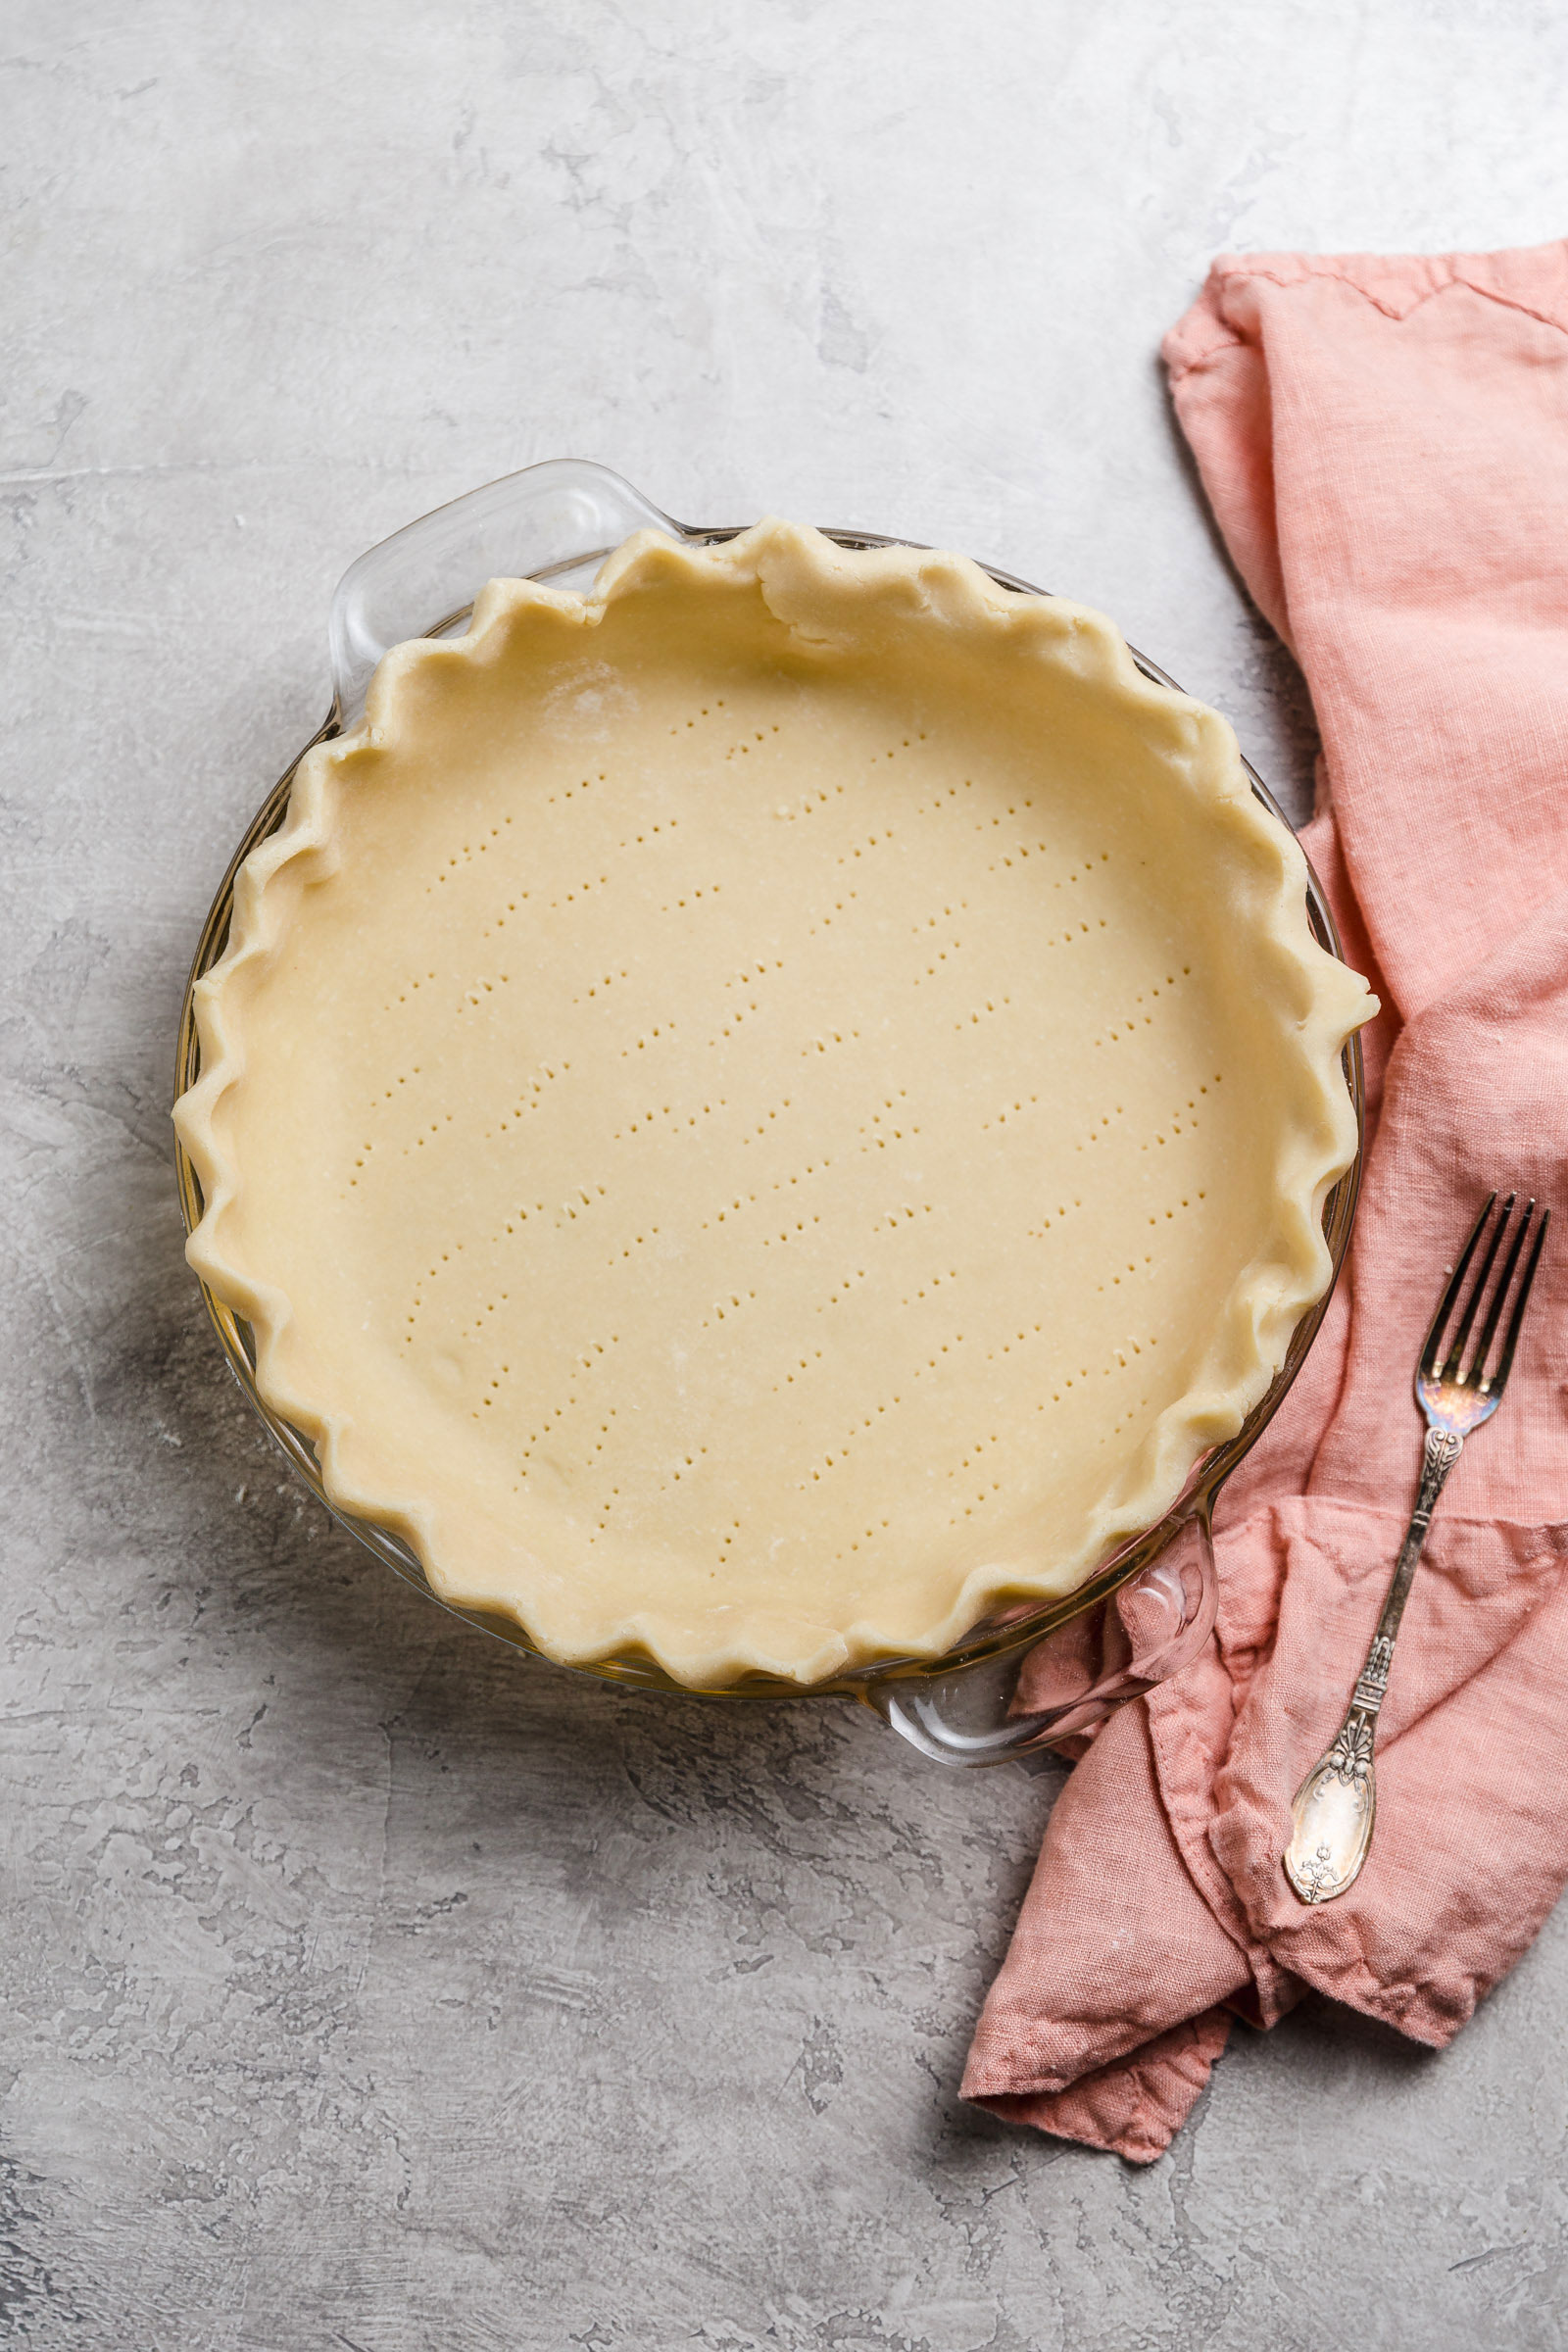 Unbaked pie crust in glass pie plate with fork on a pink kitchen towel next to it.